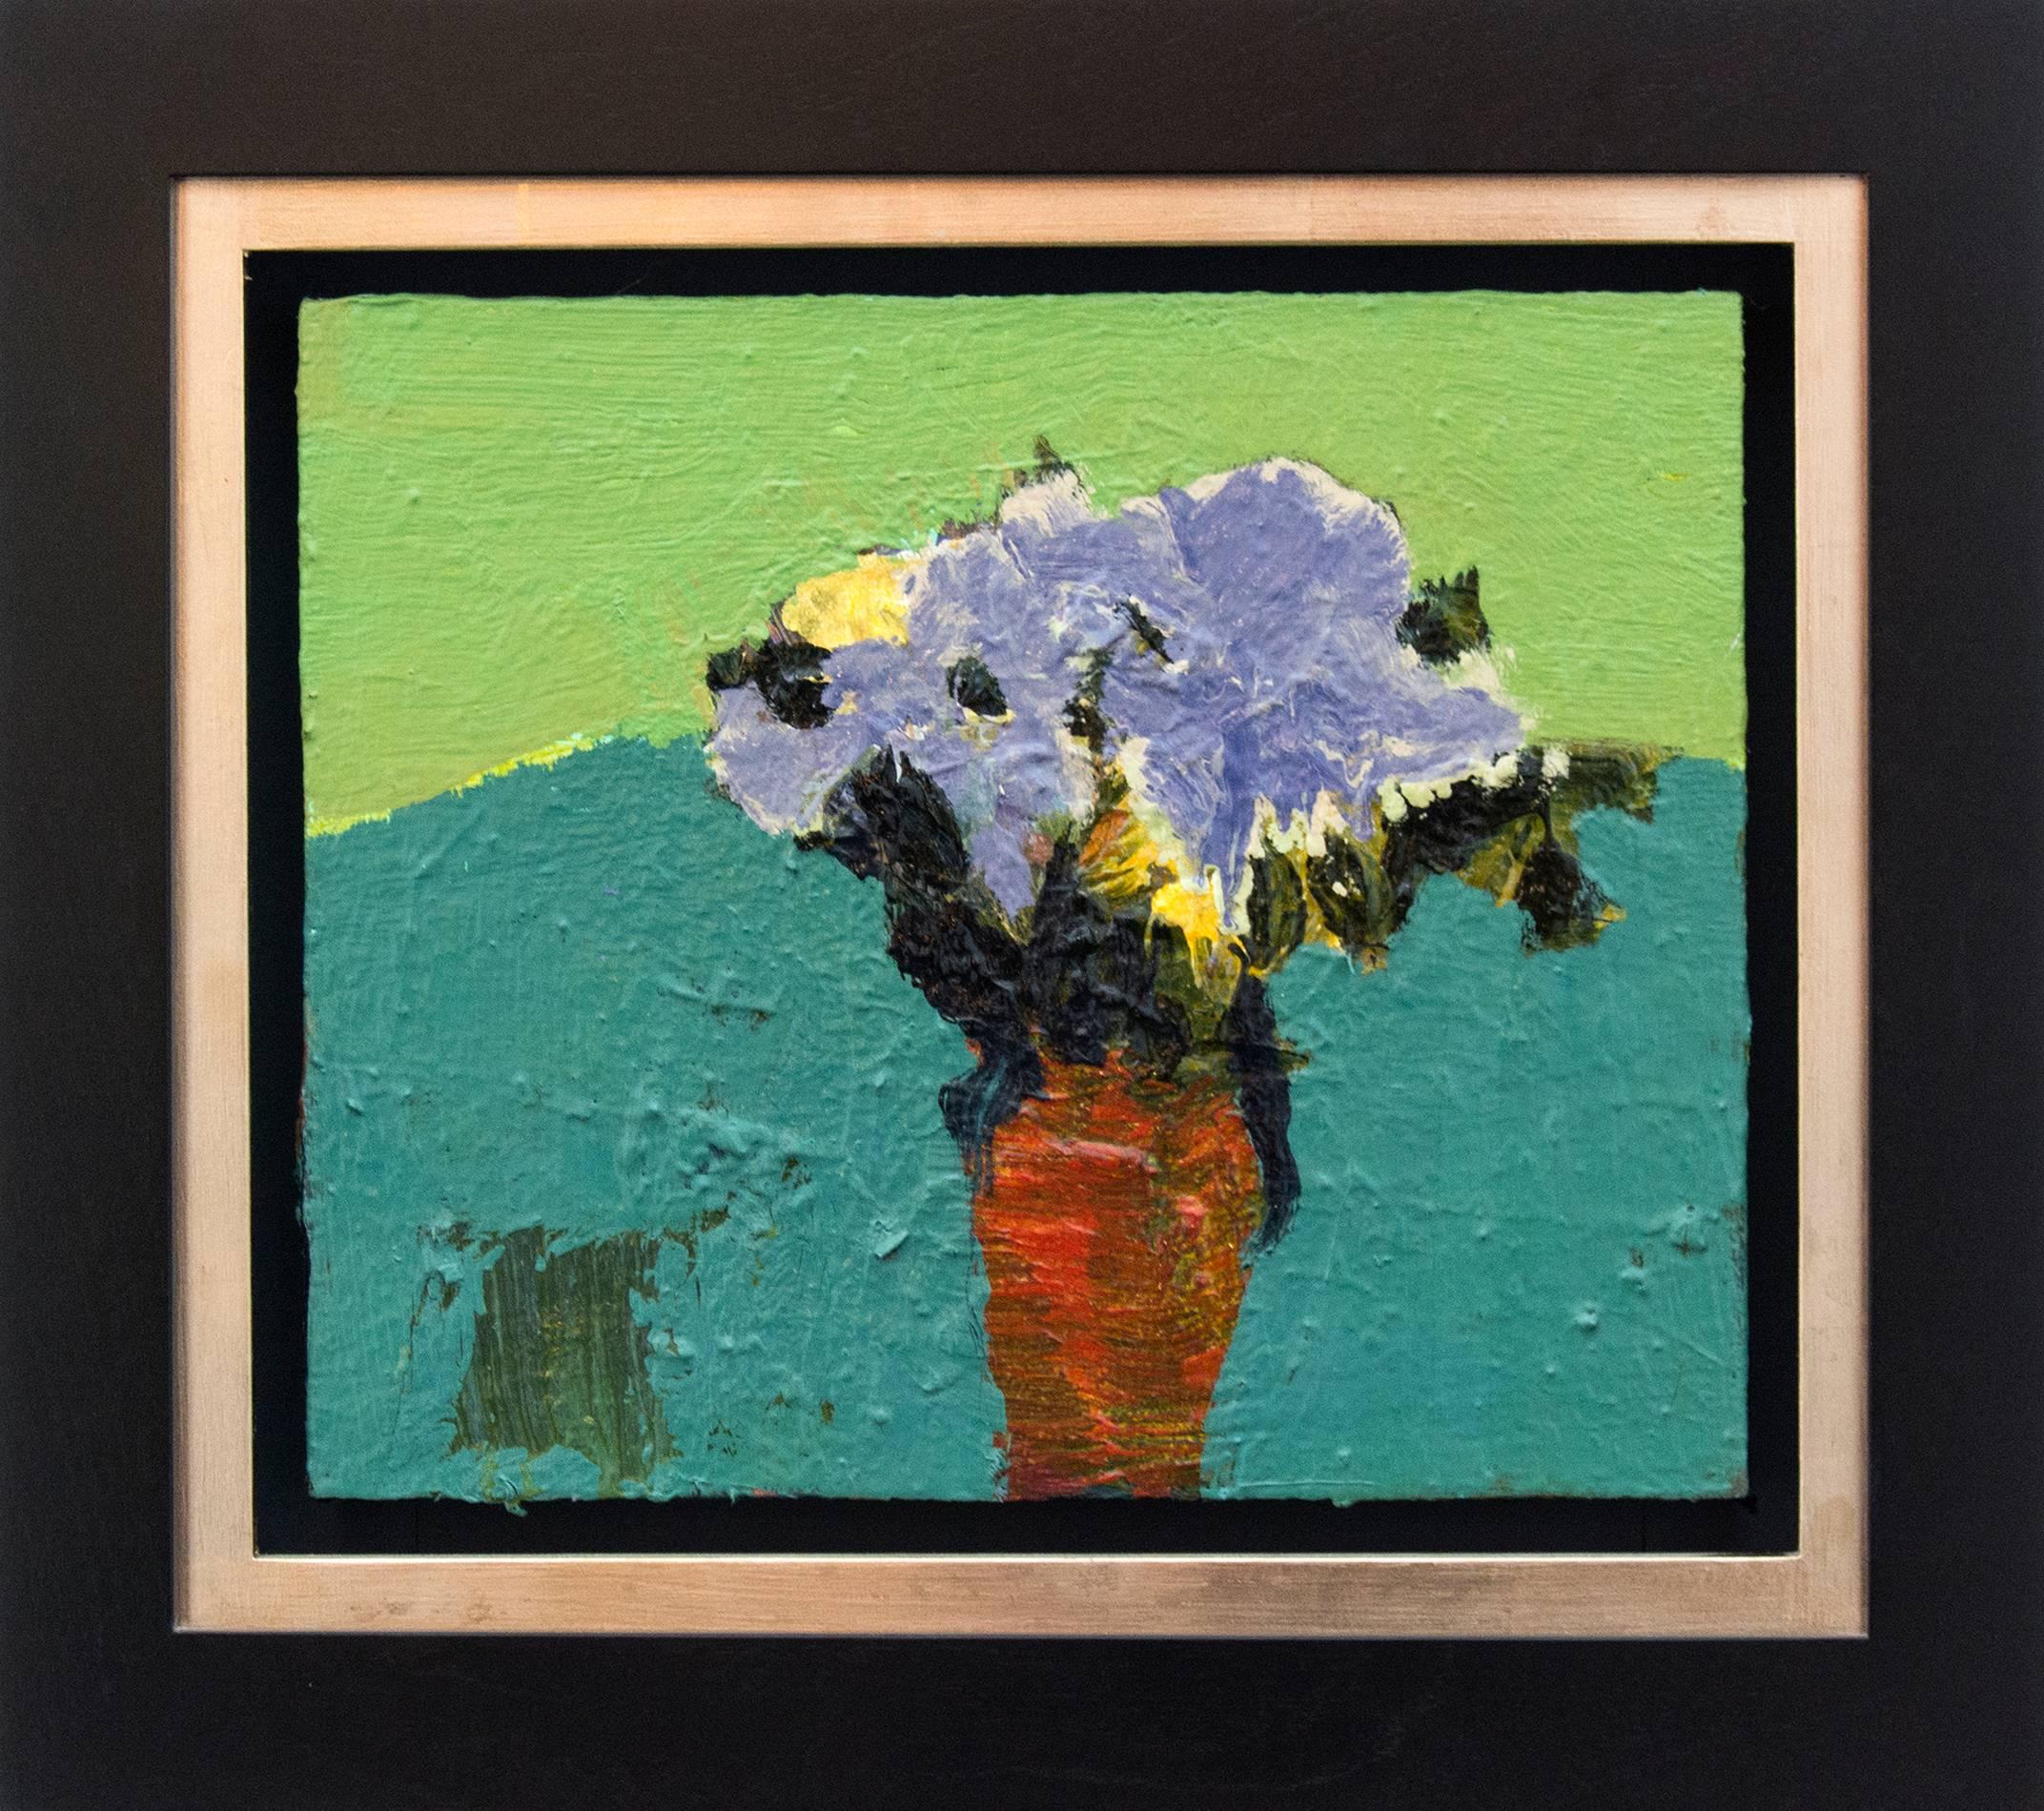 In layers of thick, expressive brushwork, flowers of mauve touched with yellow and white framed by dark, forest green leaves in a narrow orange vase are on a divided ground of teal and lime green in this 12 inches wide oil on linen. 

The bold